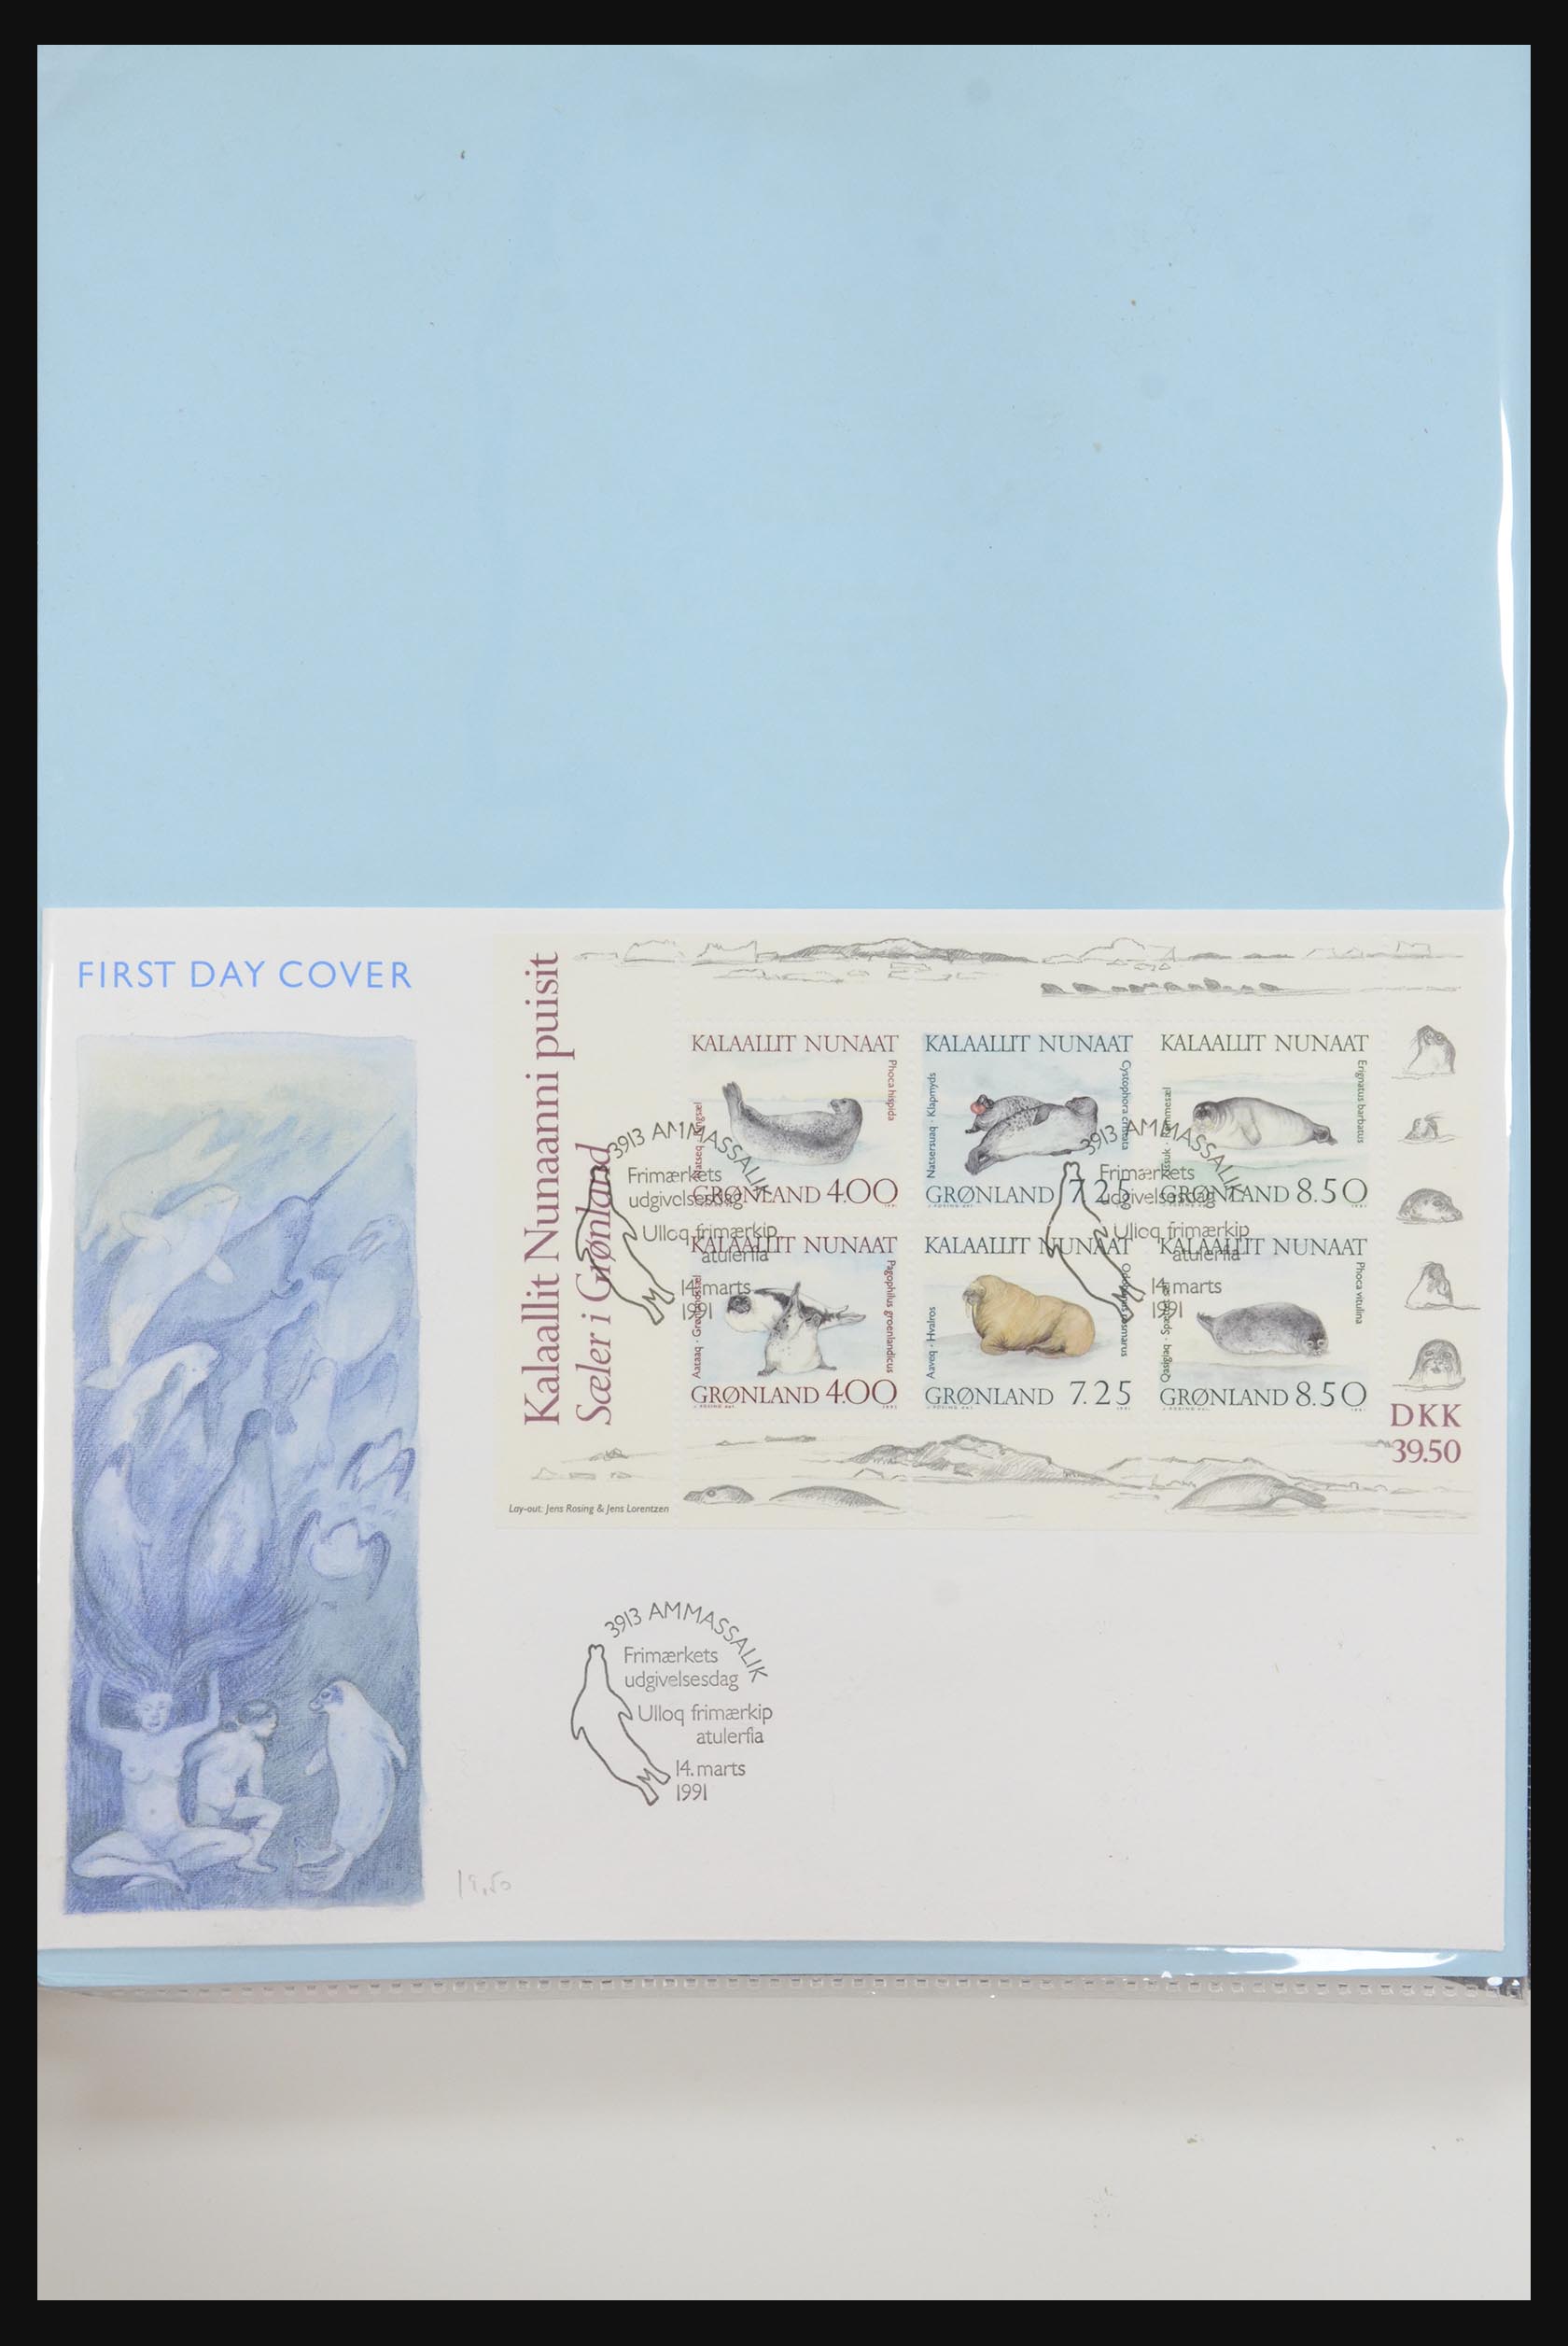 31915 366 - 31915 Western Europe souvenir sheets and stamp booklets on FDC.